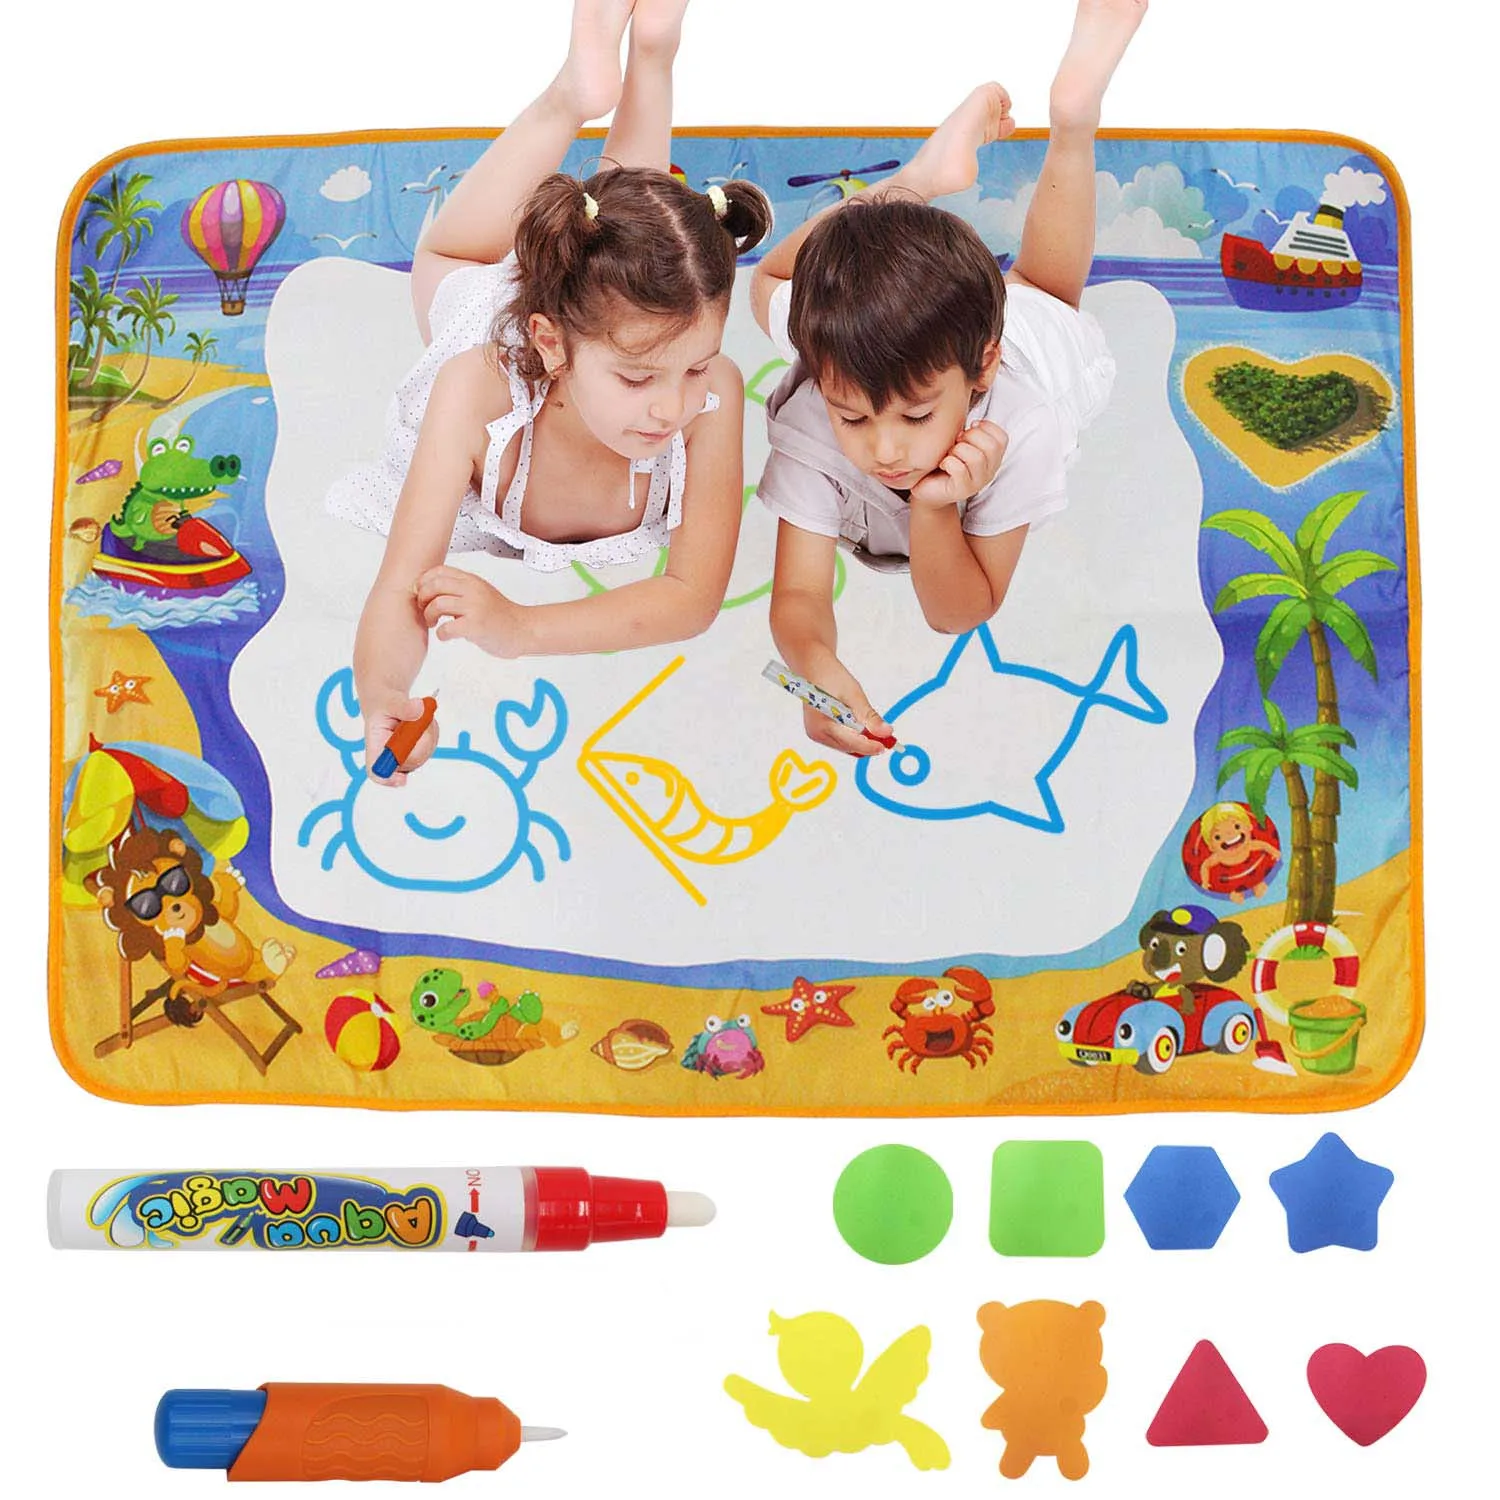 

Magic Water Painting Mat with Magic Water Pen Write Graffiti Pen Doodle Baby Toy Creative Children's Educational Toys 100x70CM